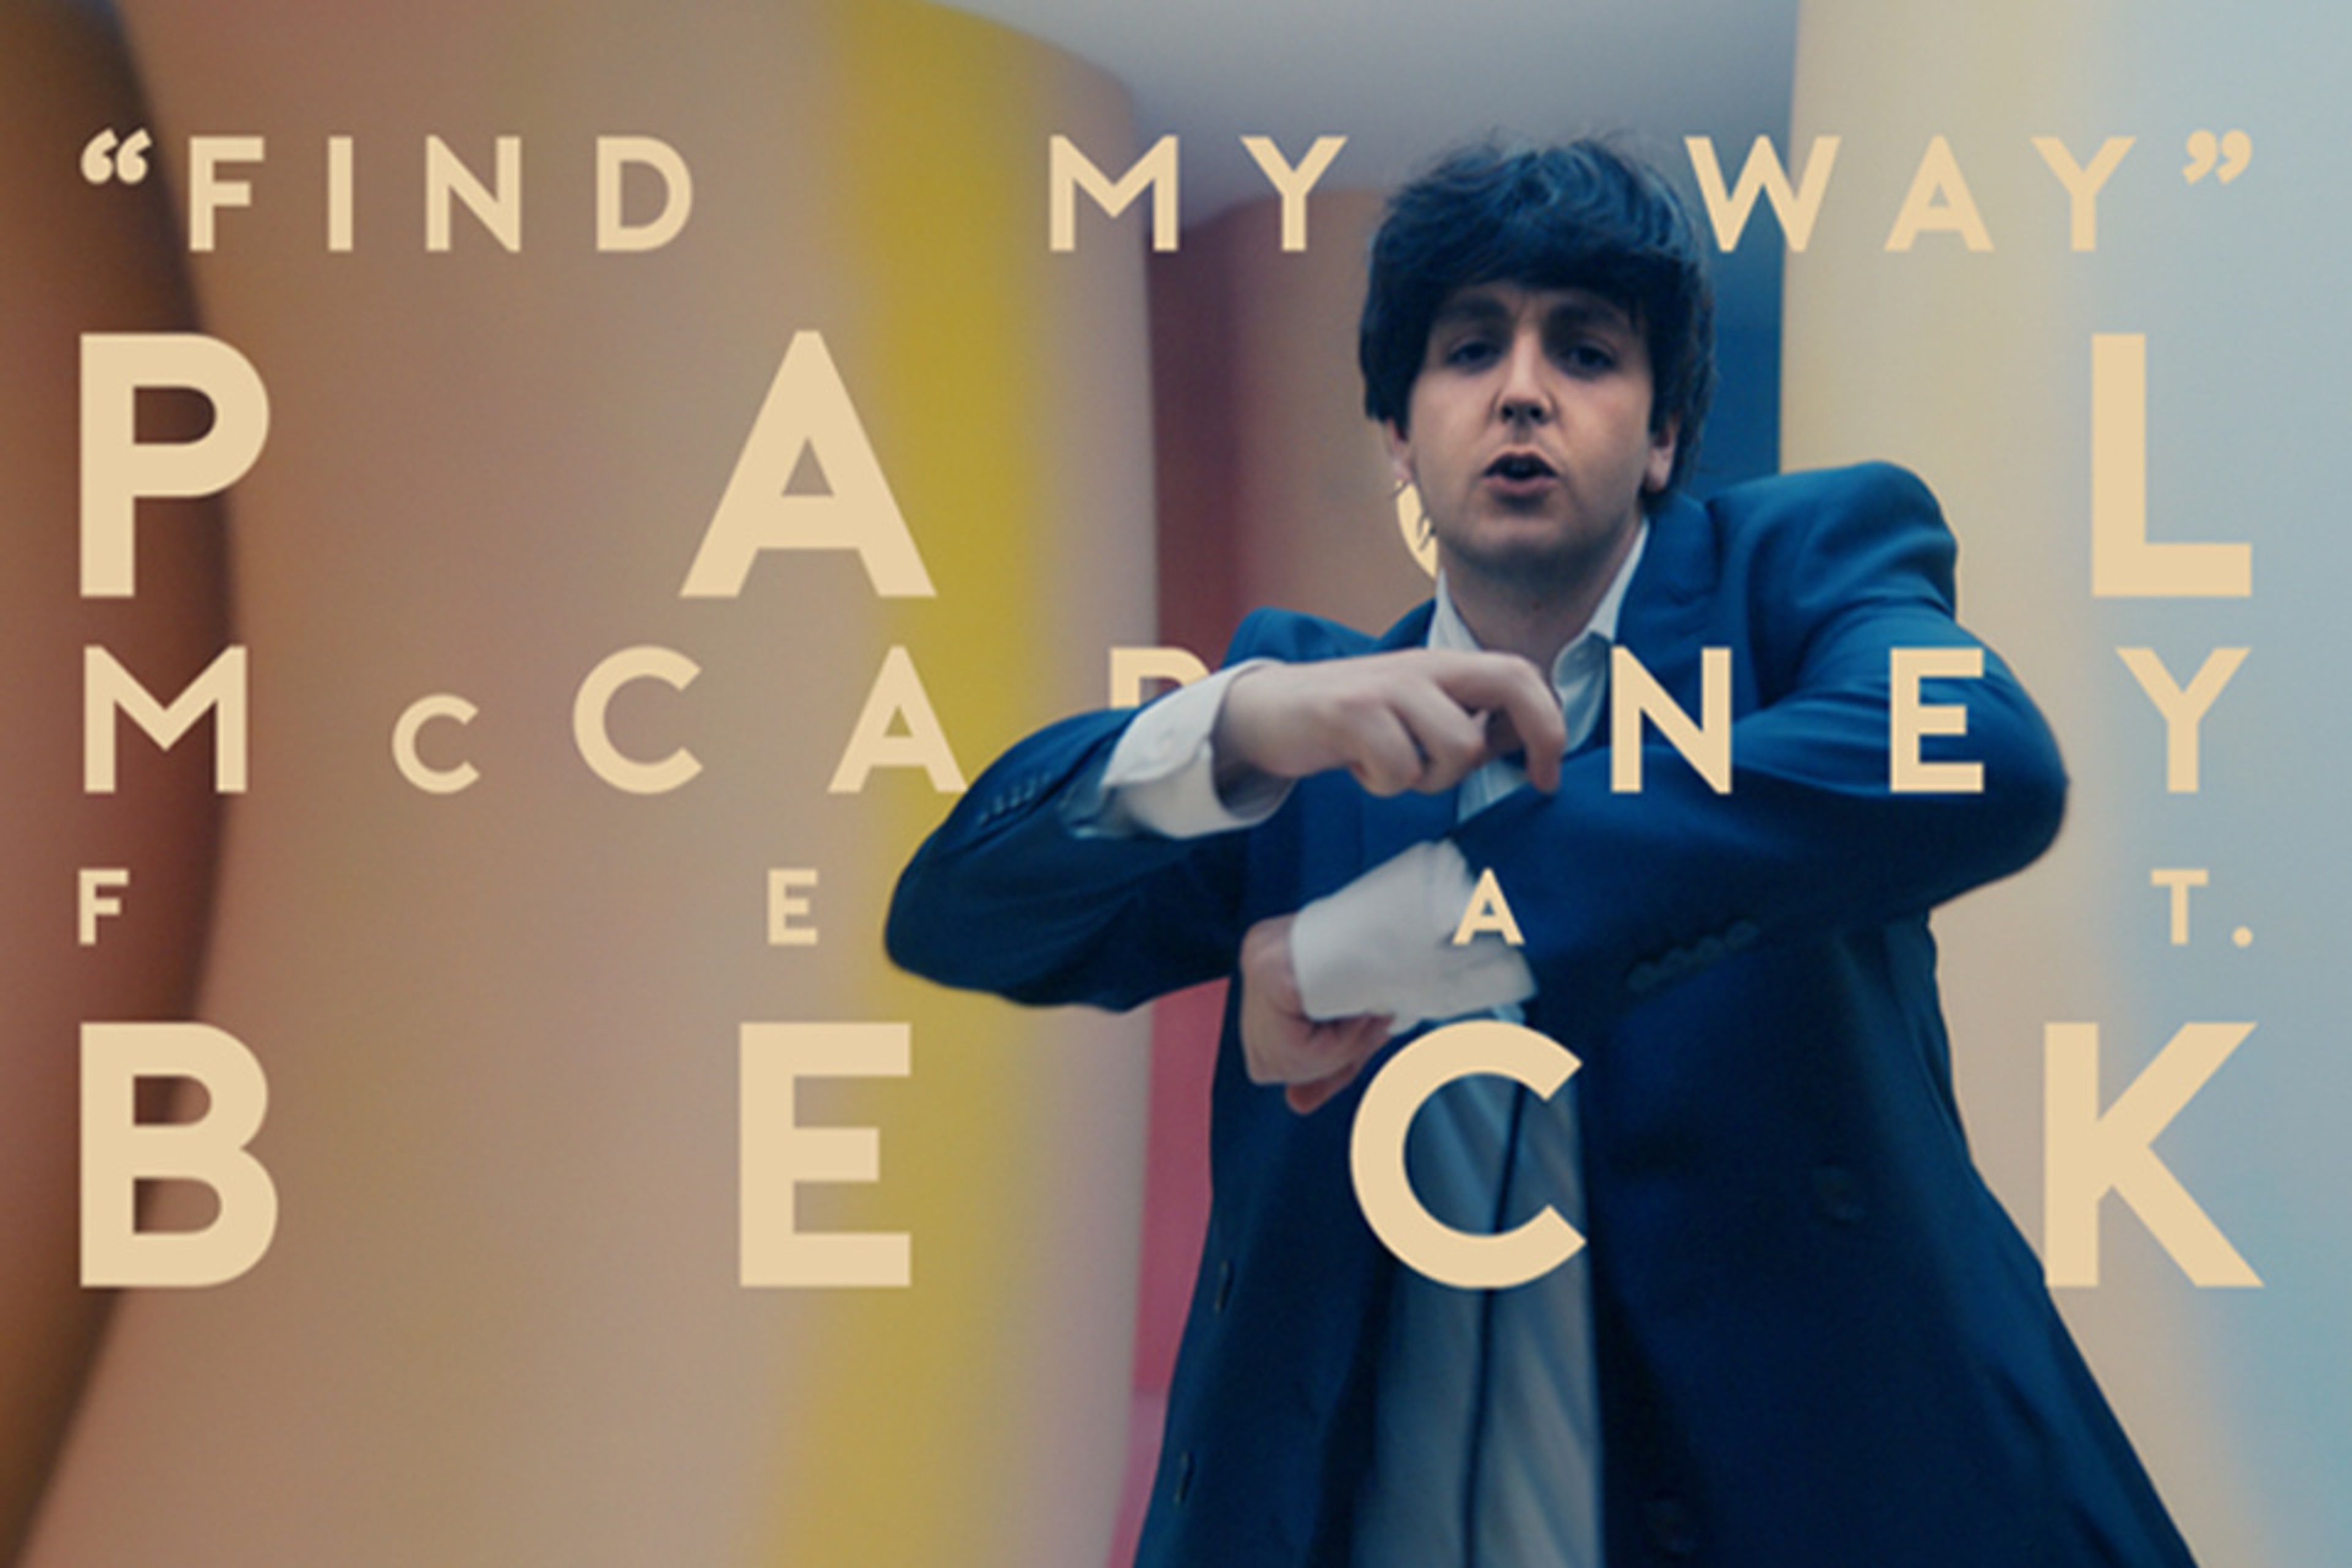 Video still from the 'Find My Way (feat. Beck)' music video